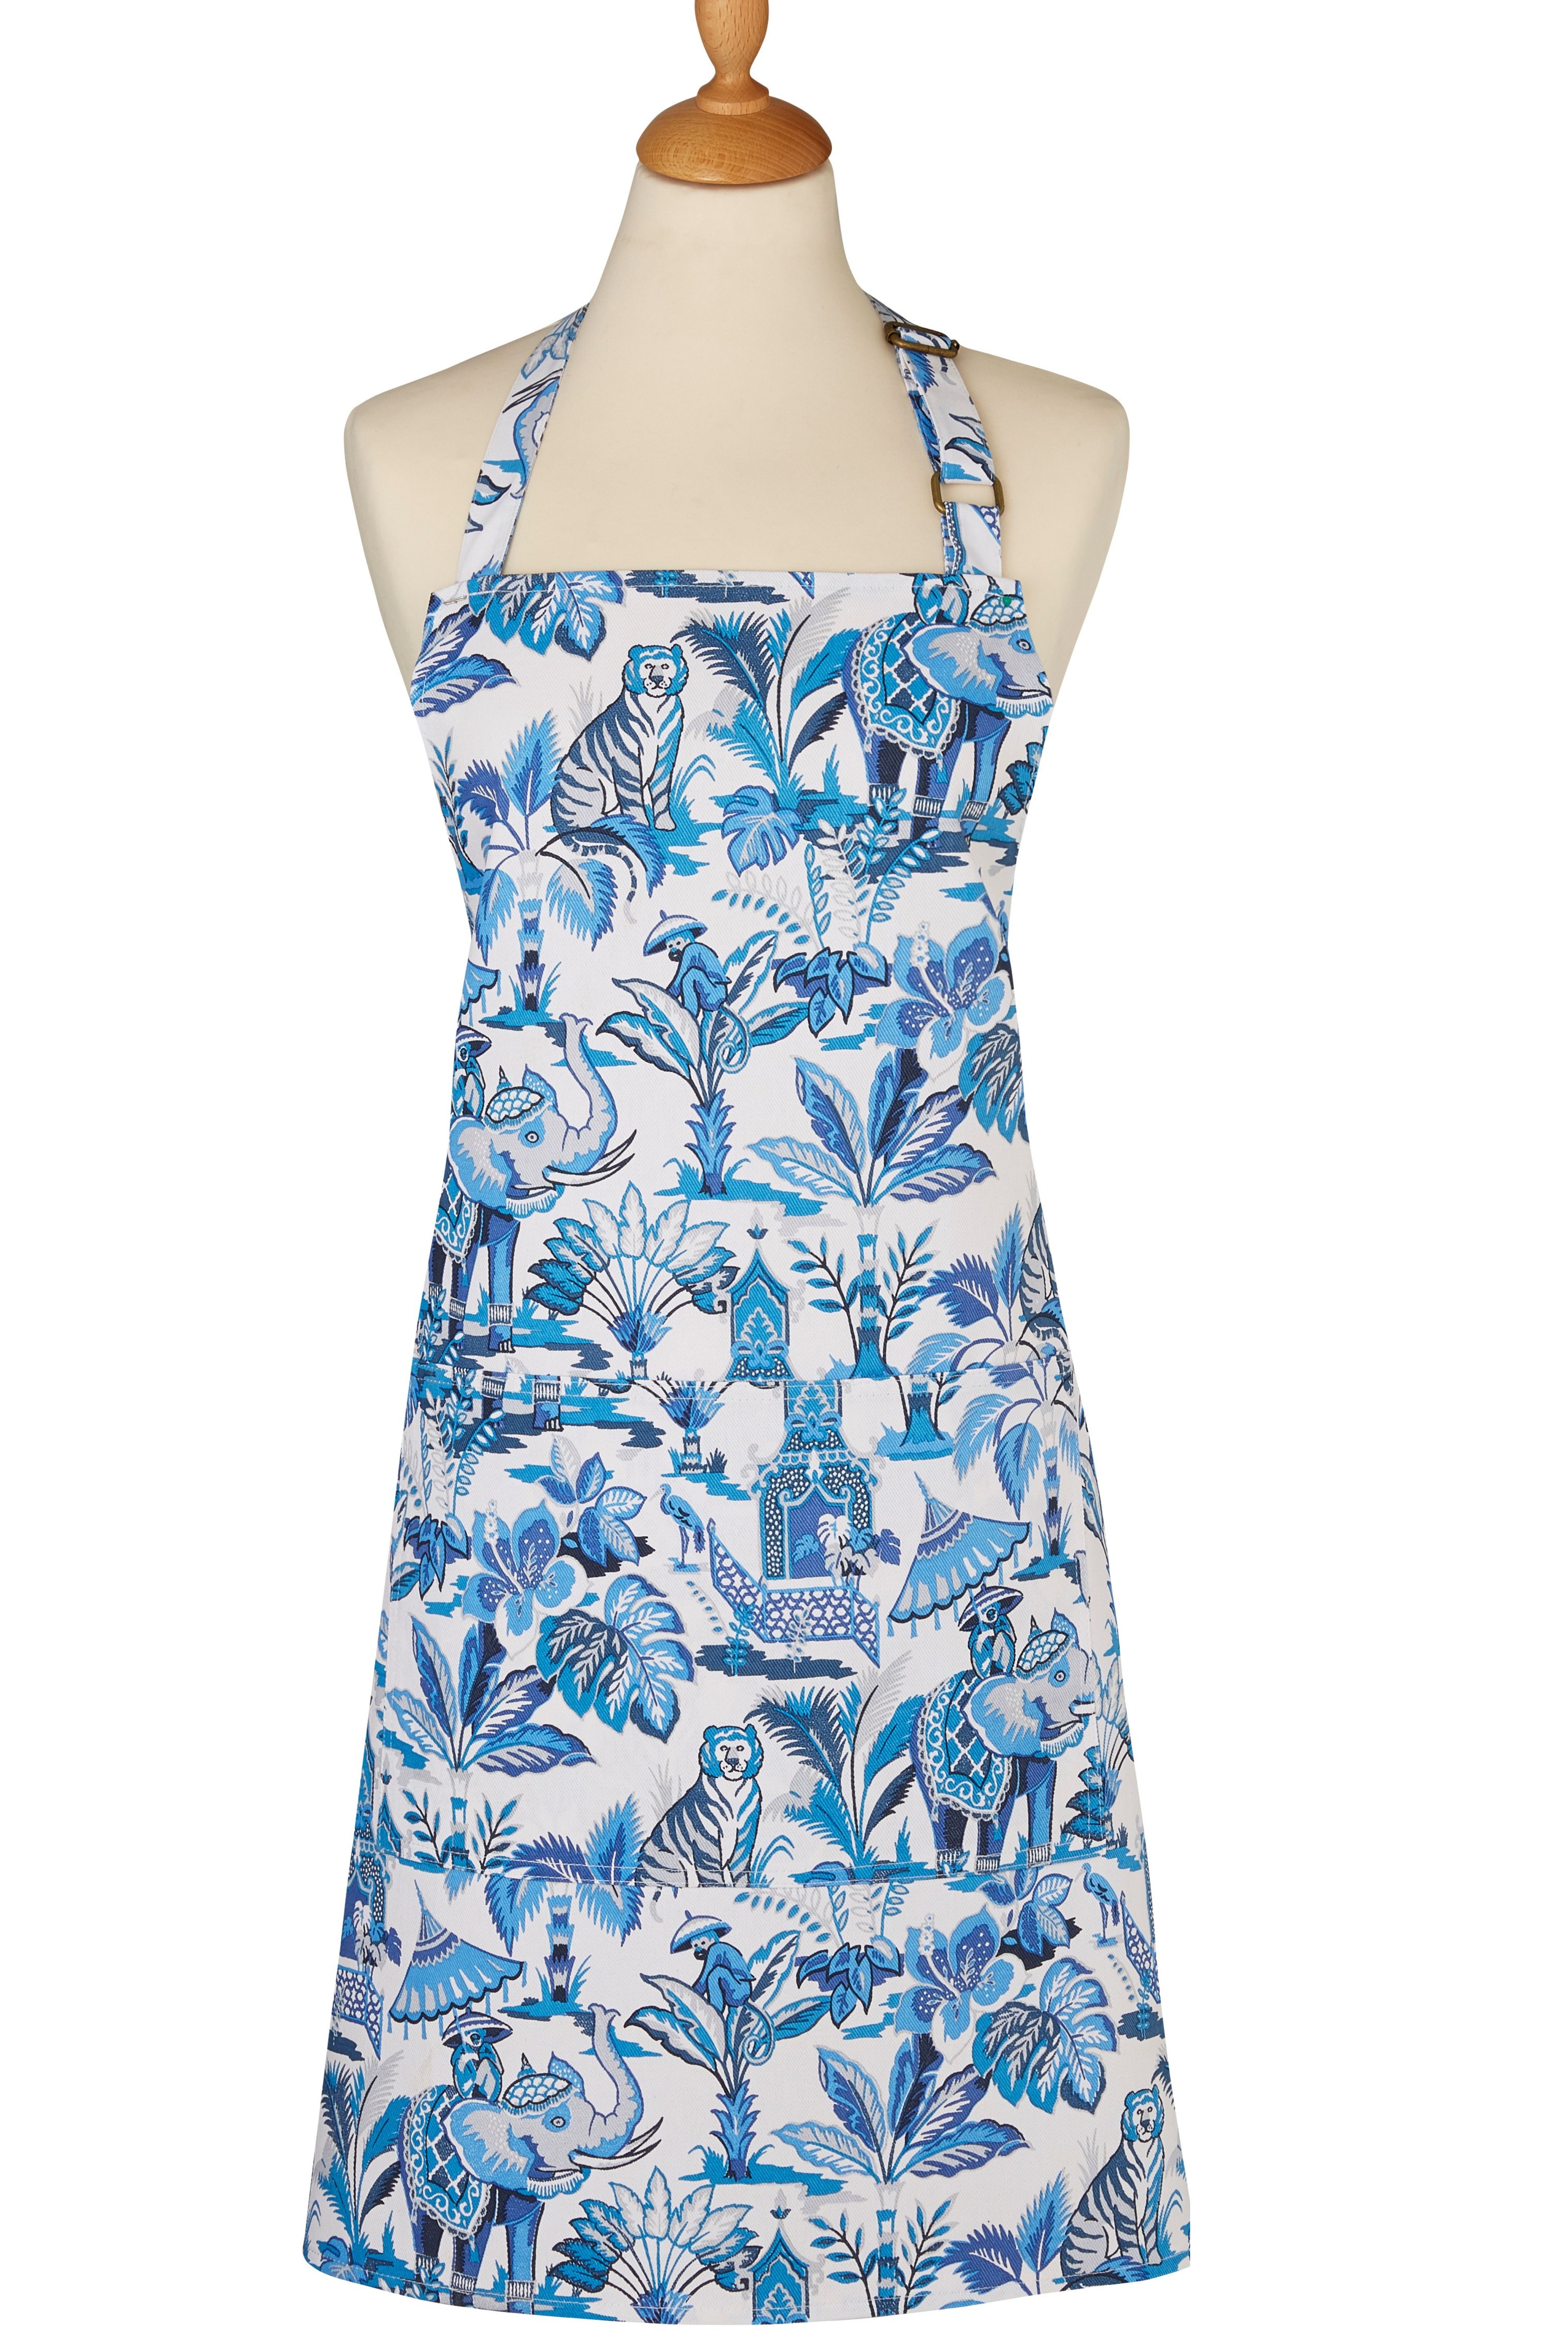 Ulster Weavers India Blue Cotton Apron